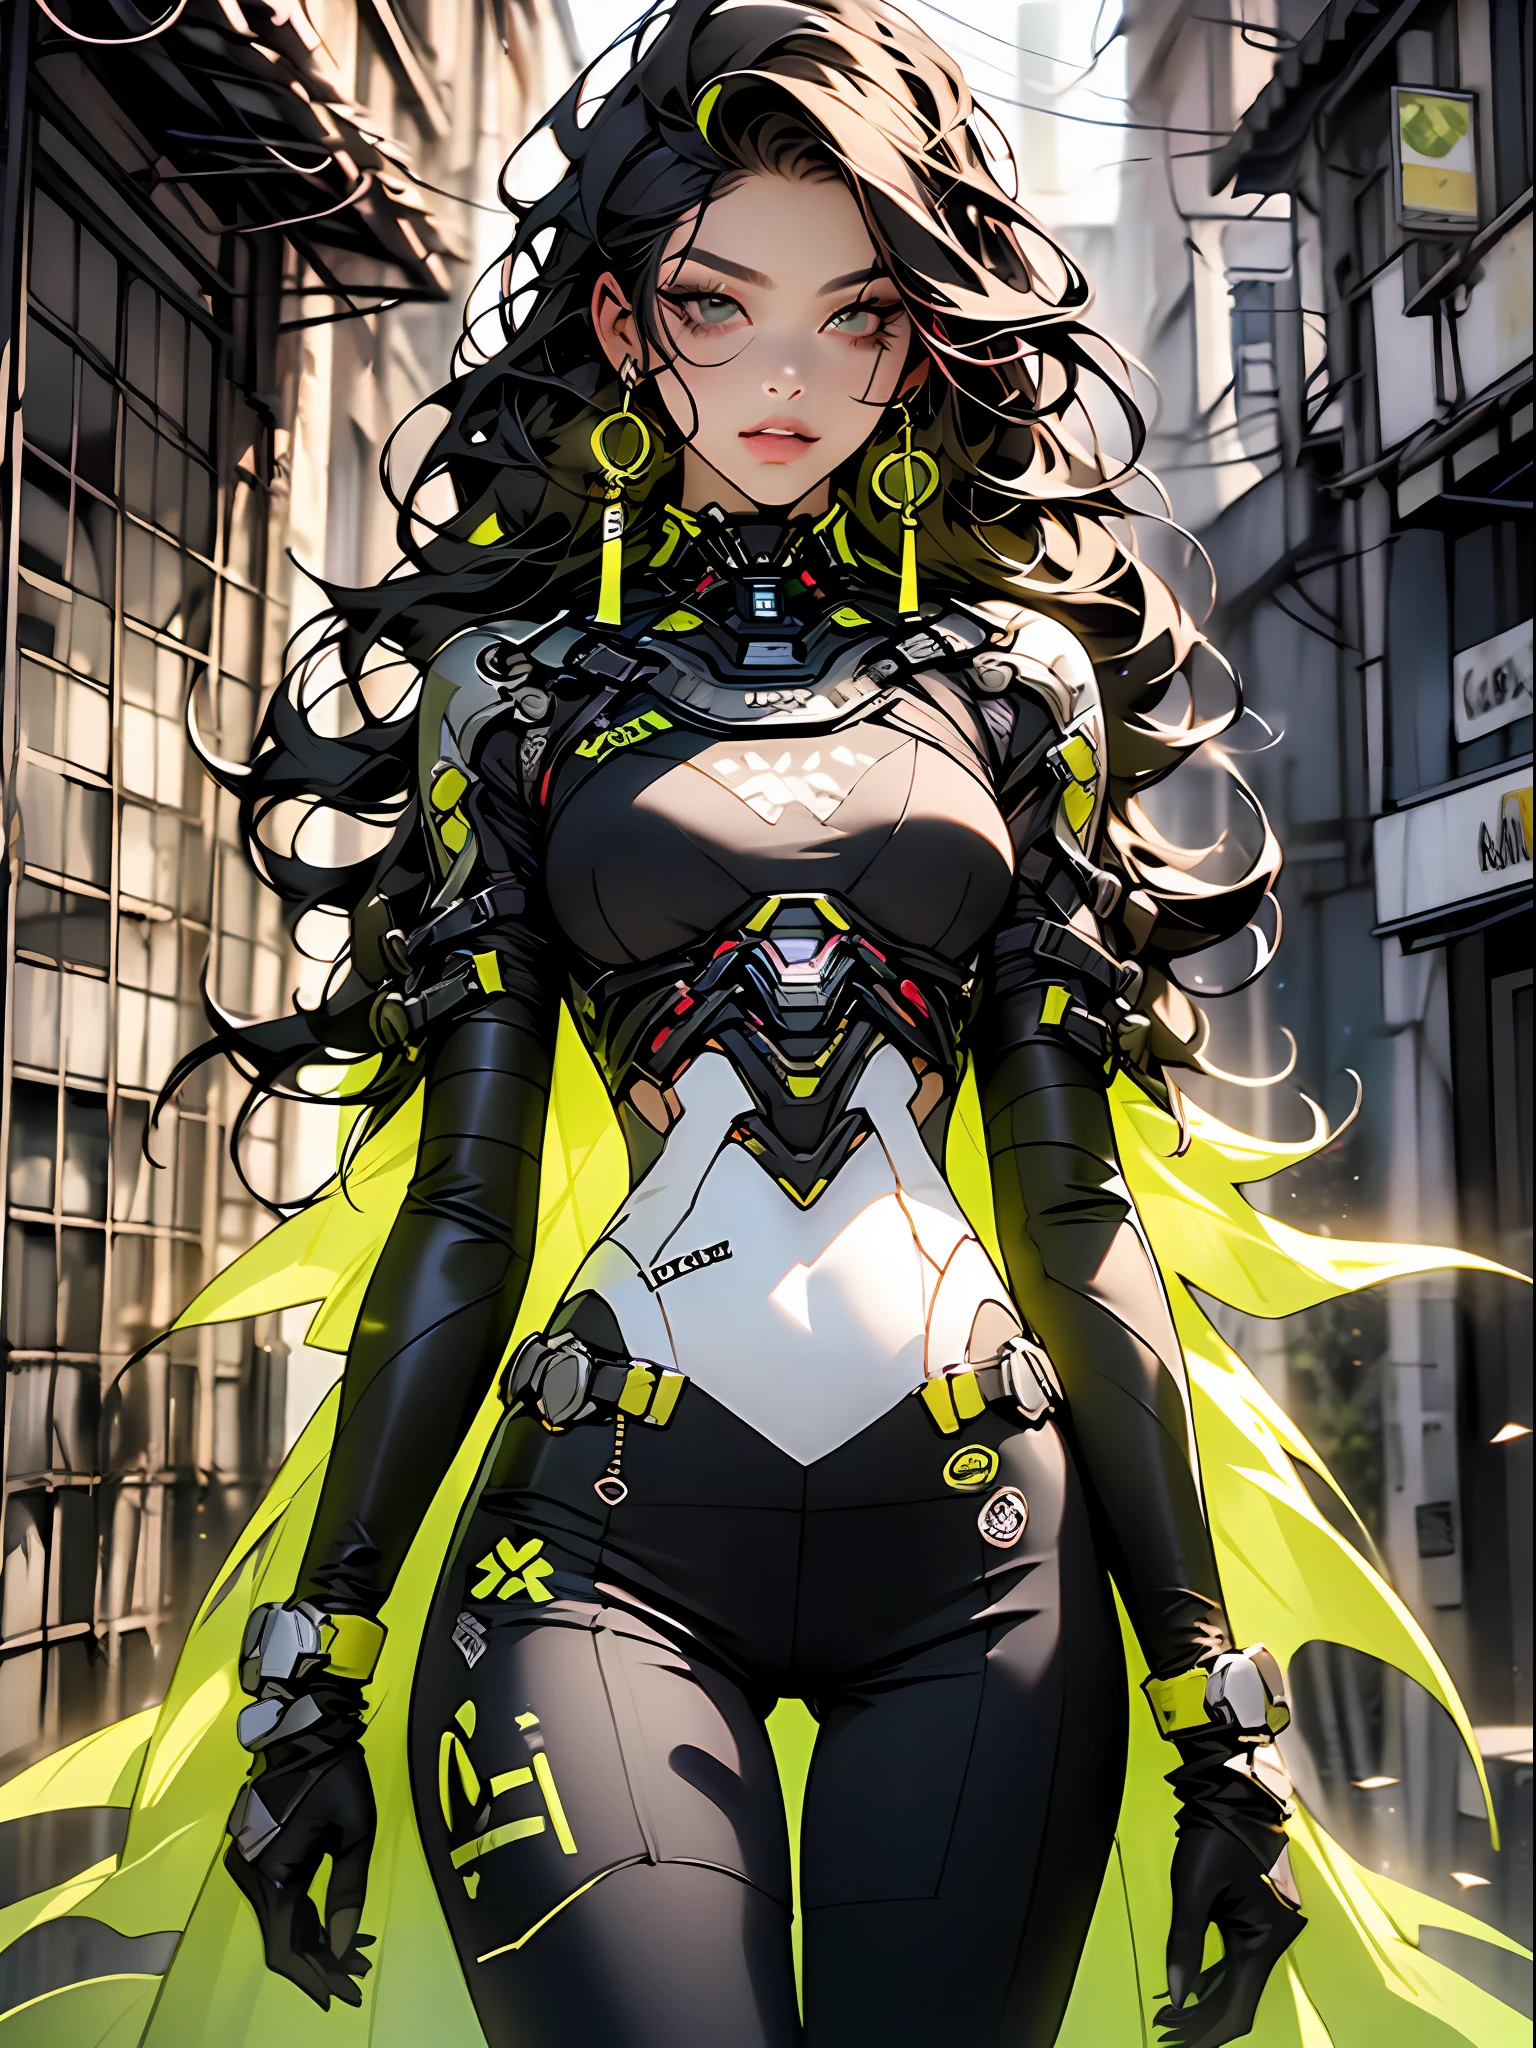 ((best qualityer)), ((​masterpiece)), adult girl in hyper-detailed outfit with skull-shaped chest, Modern black clothing with yellow details, White hair, urban warrior with exoskeleton